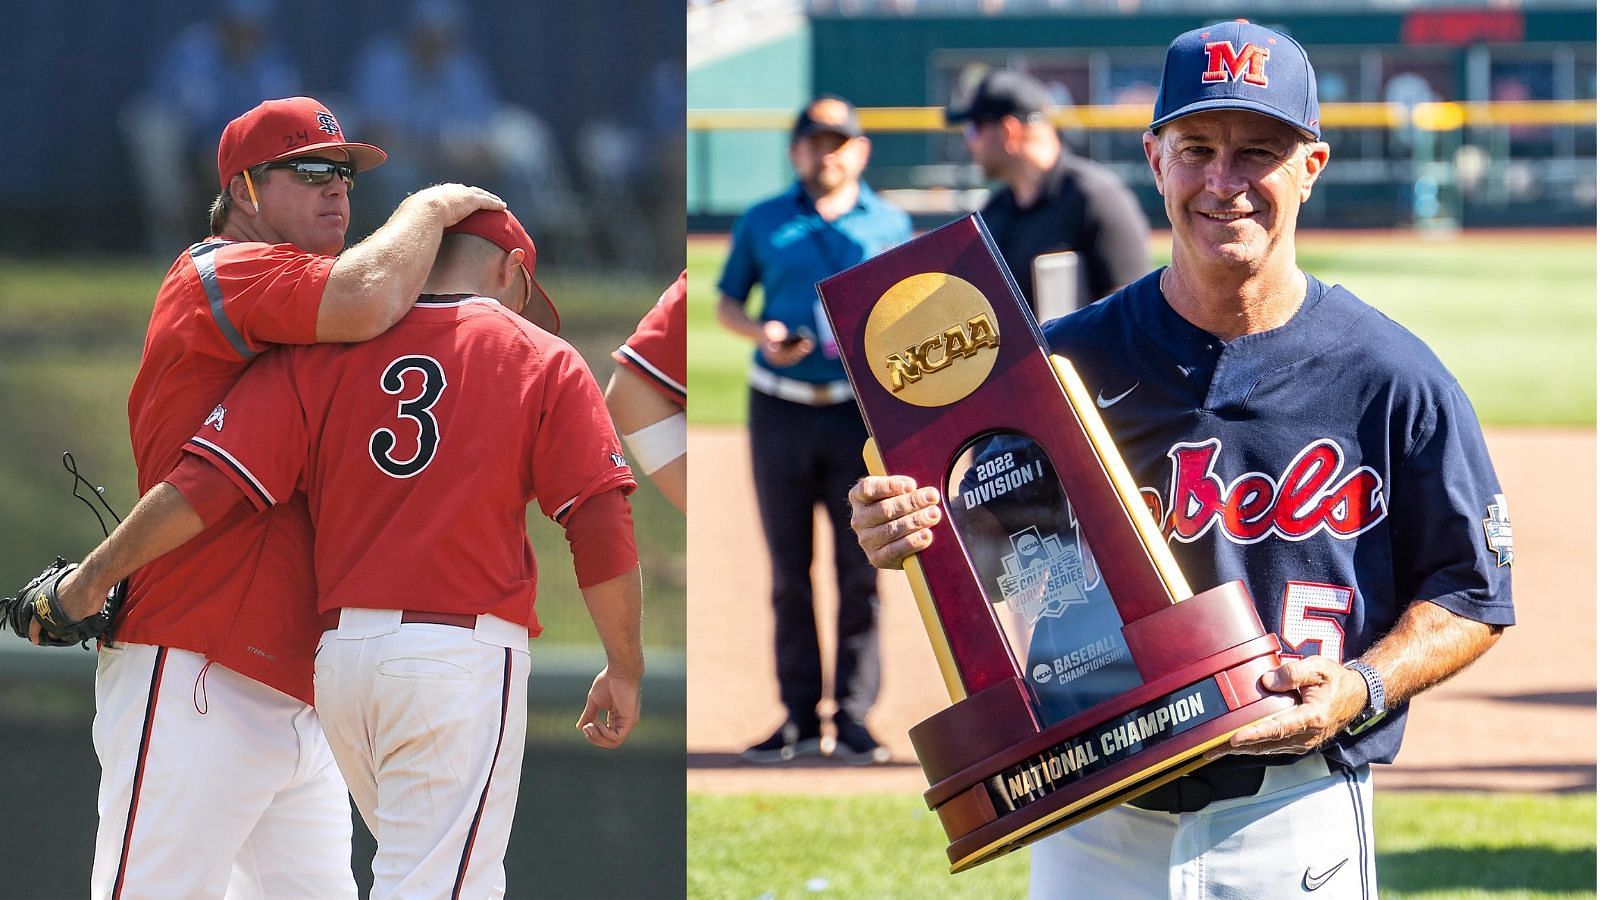 Coach Mike Batesole, shown here in 2022, won the 2008 CWS with Fresno State as a No. 4 seed, while Ole Miss and Mike Bianco were the last team in the NCAA field in 2022.